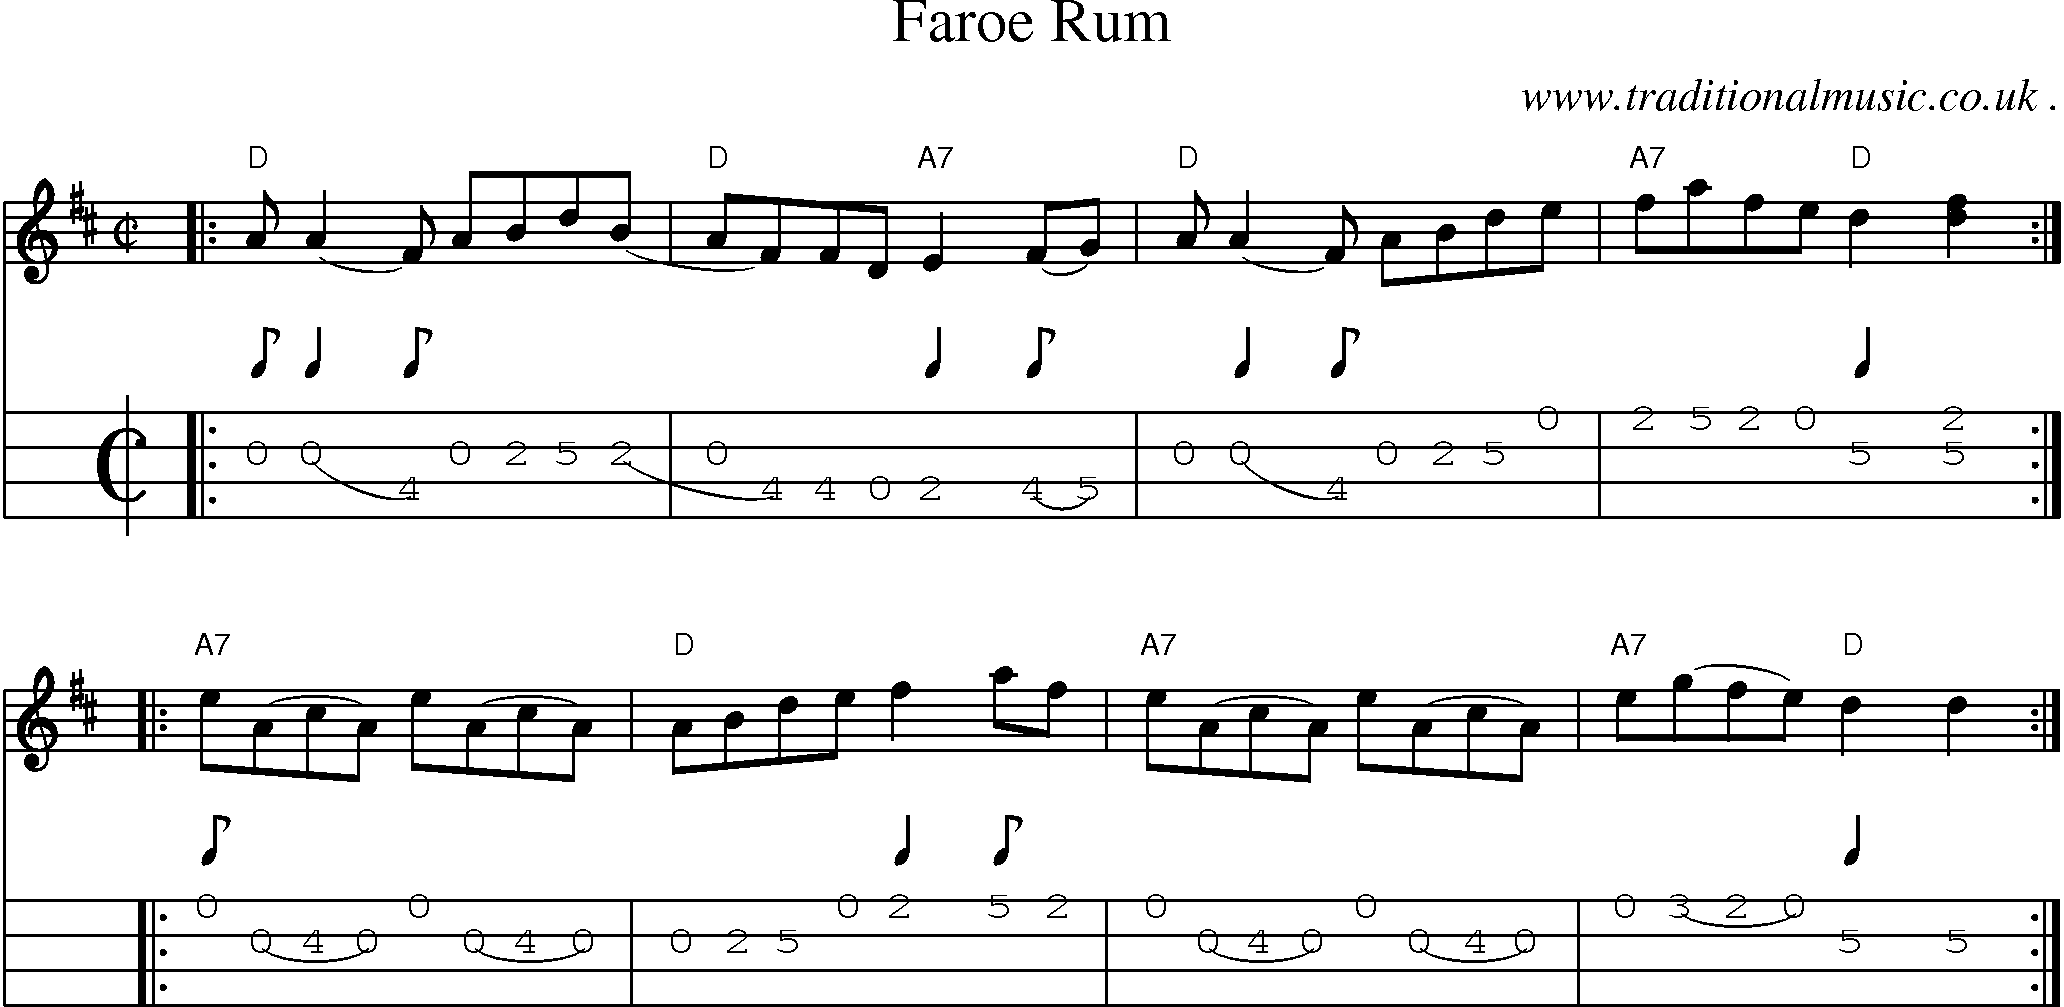 Sheet-music  score, Chords and Mandolin Tabs for Faroe Rum